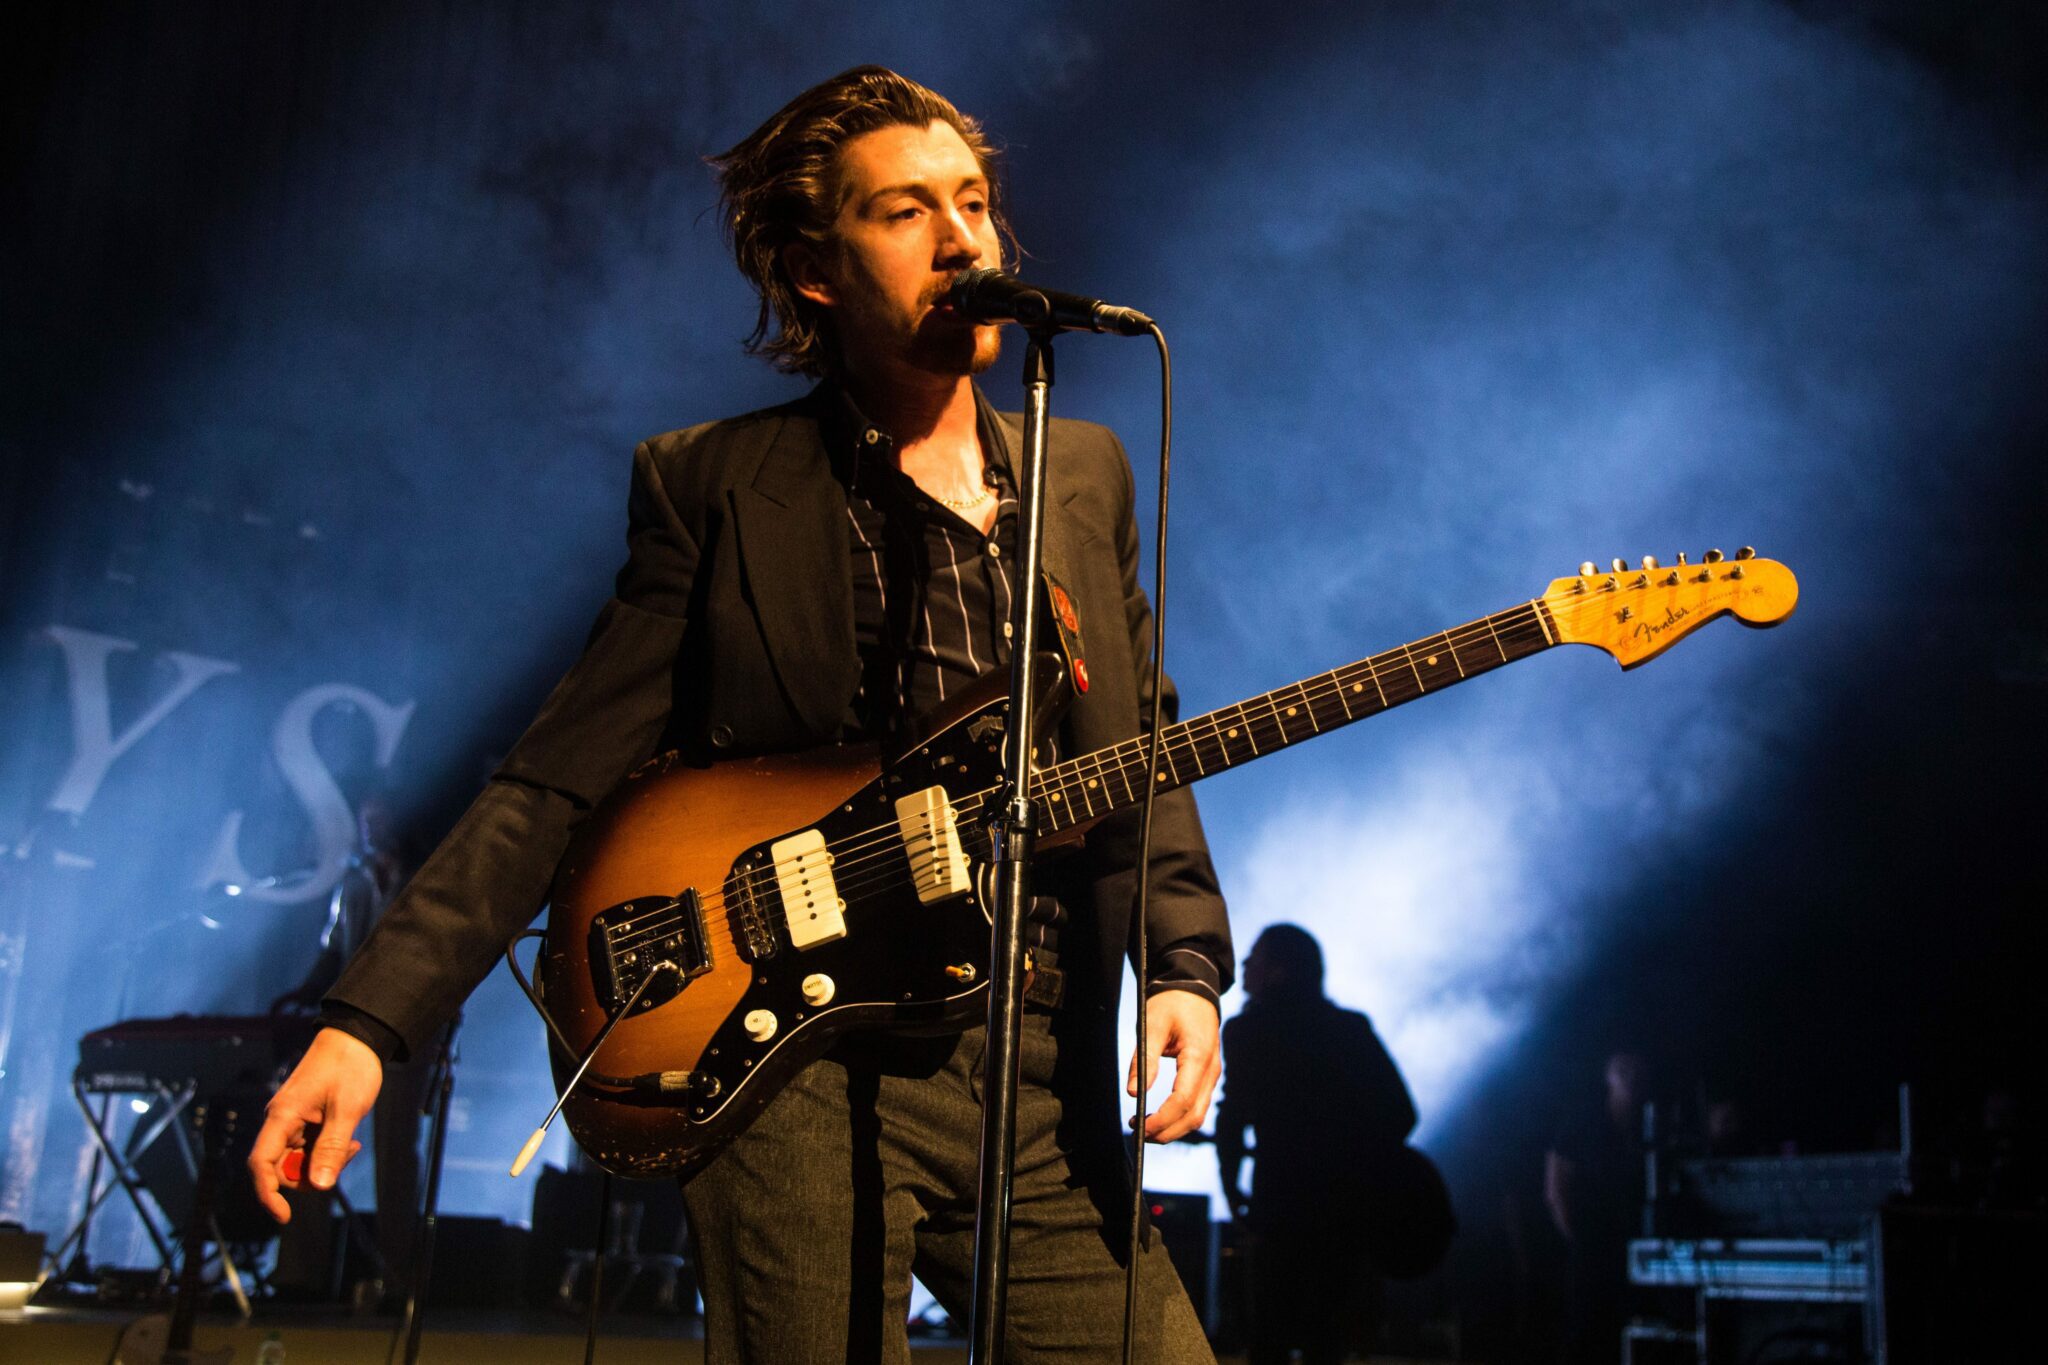 A close up shot of Alex Turner from the Arctic Monkeys with his guitar performing live